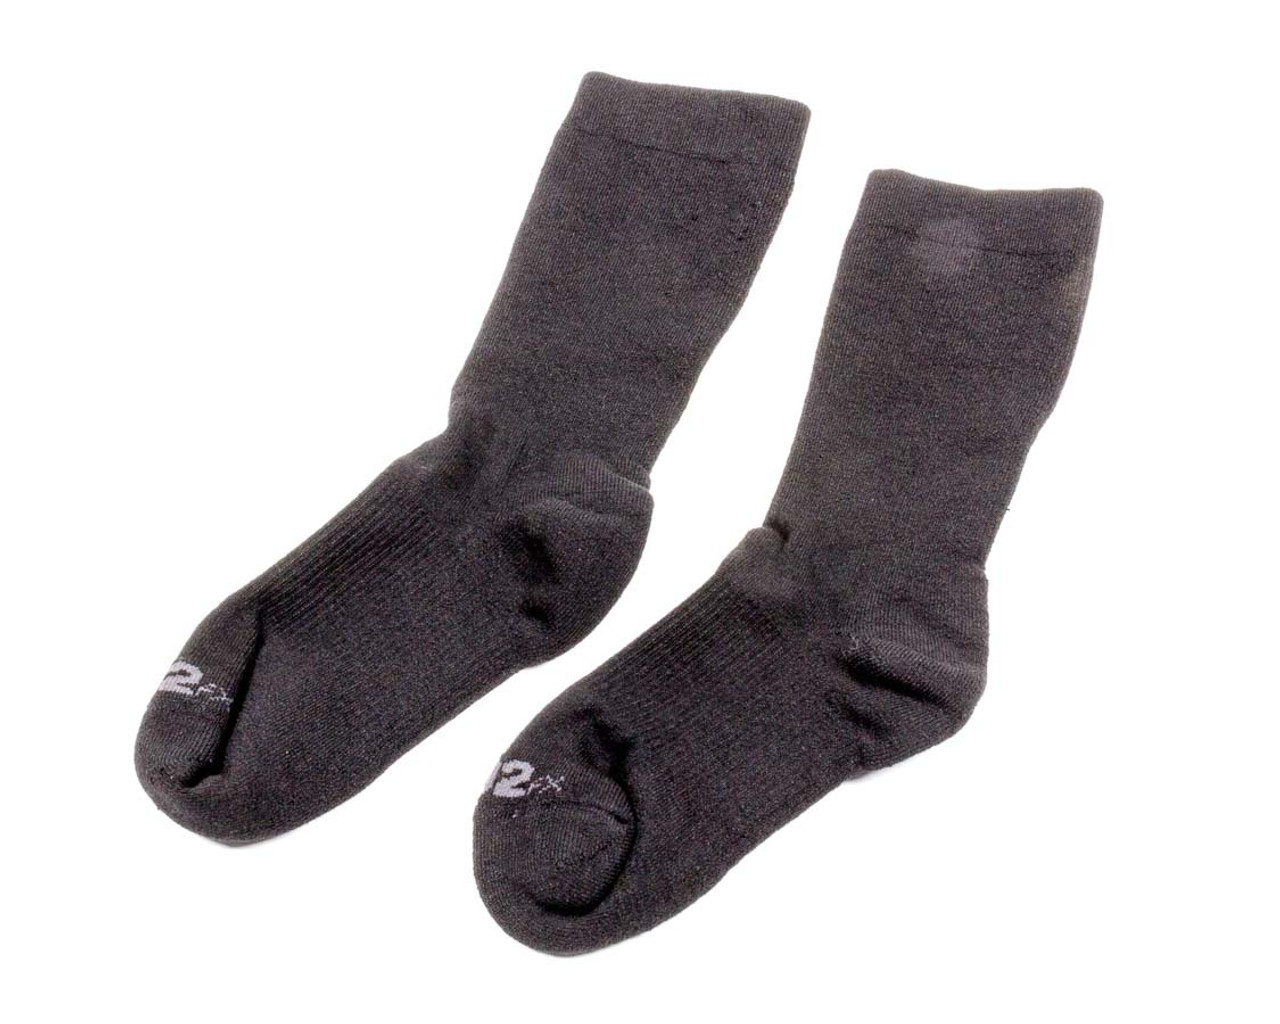 Socks Fitted X-Large SFI 3.3 Fire Resistant PXP195